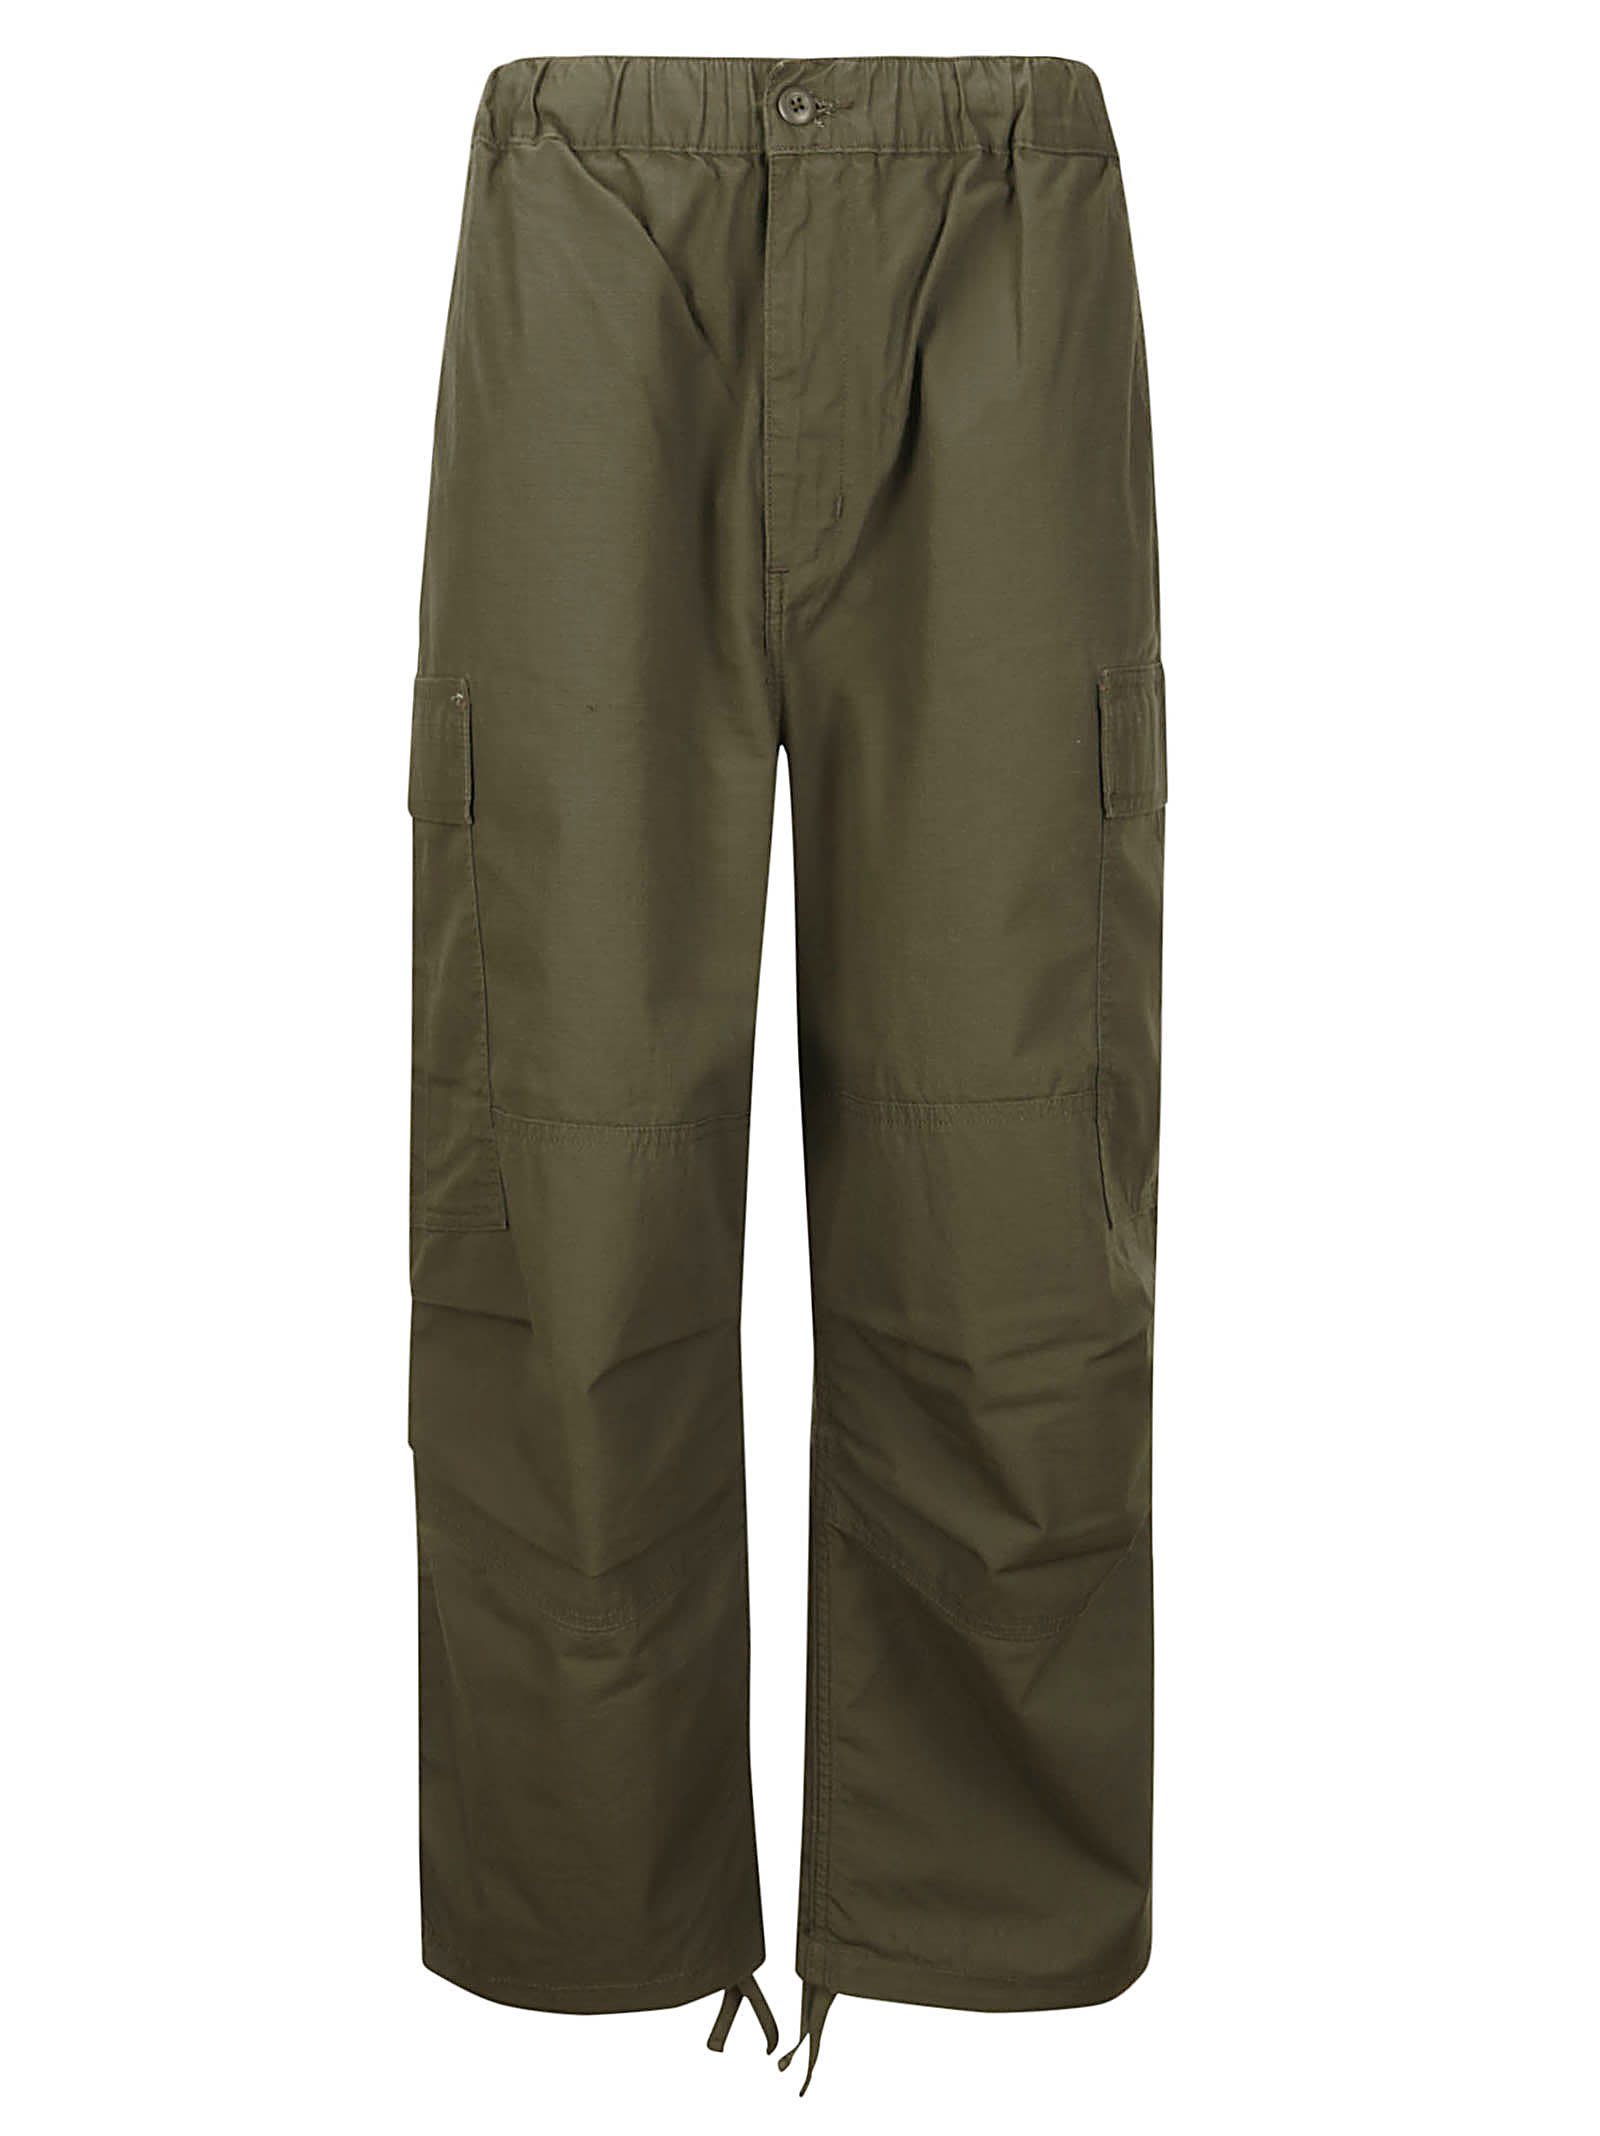 Carhartt Jet Cargo Pant columbia Ripstop - 0RINSED CYPRESS - female - Size: Small